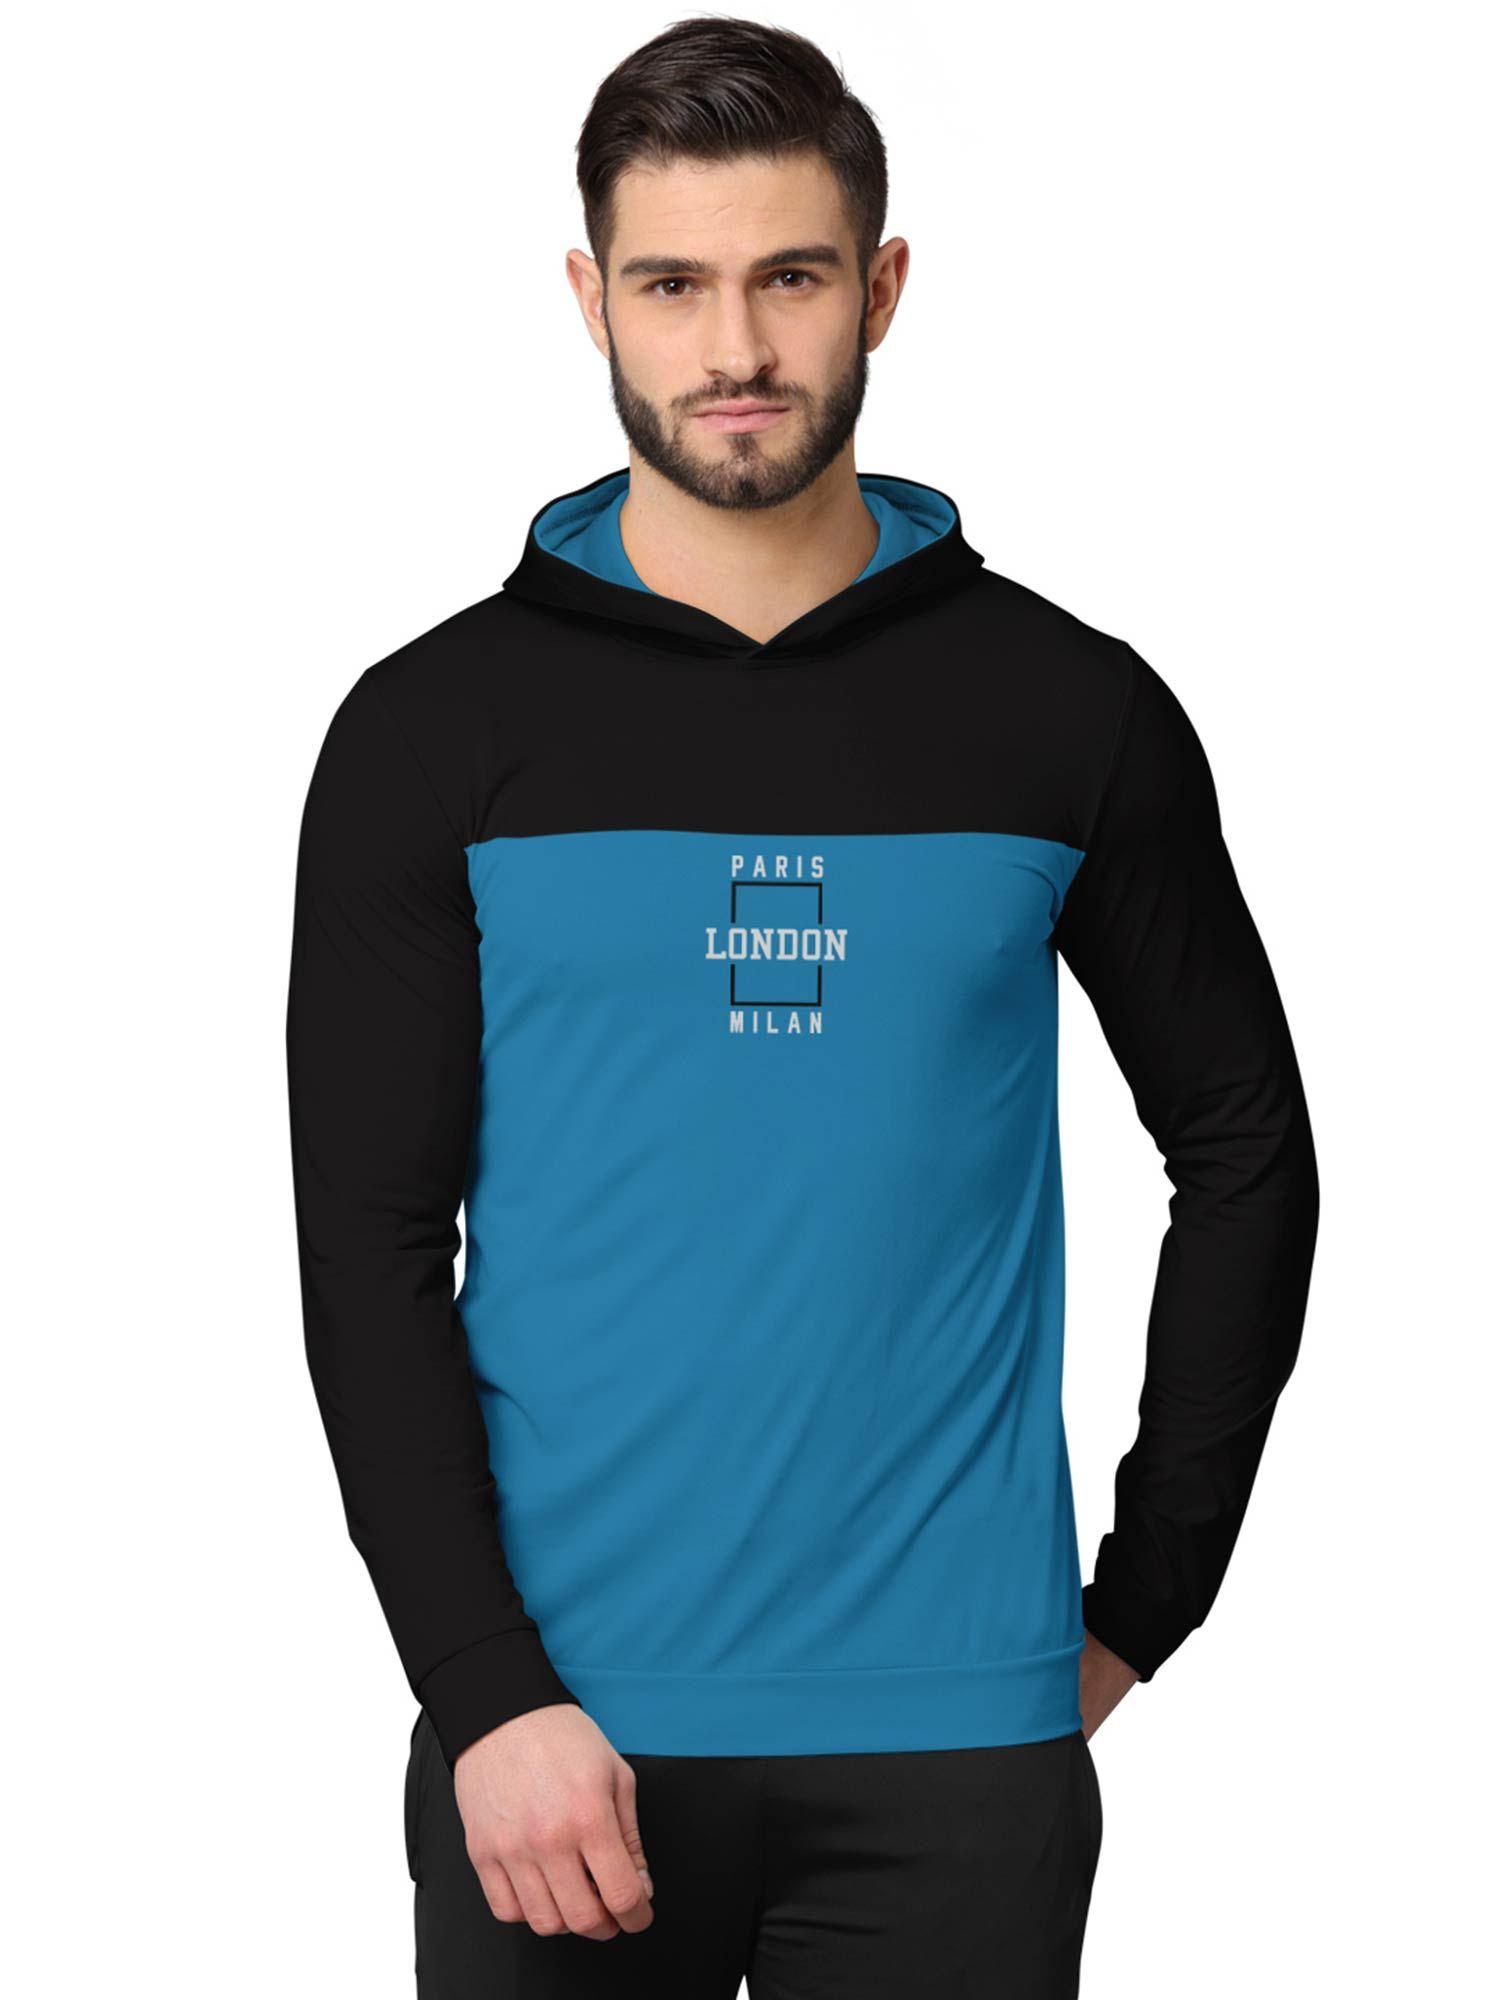 colorblock full sleeve hooded sweatshirts for men black and blue